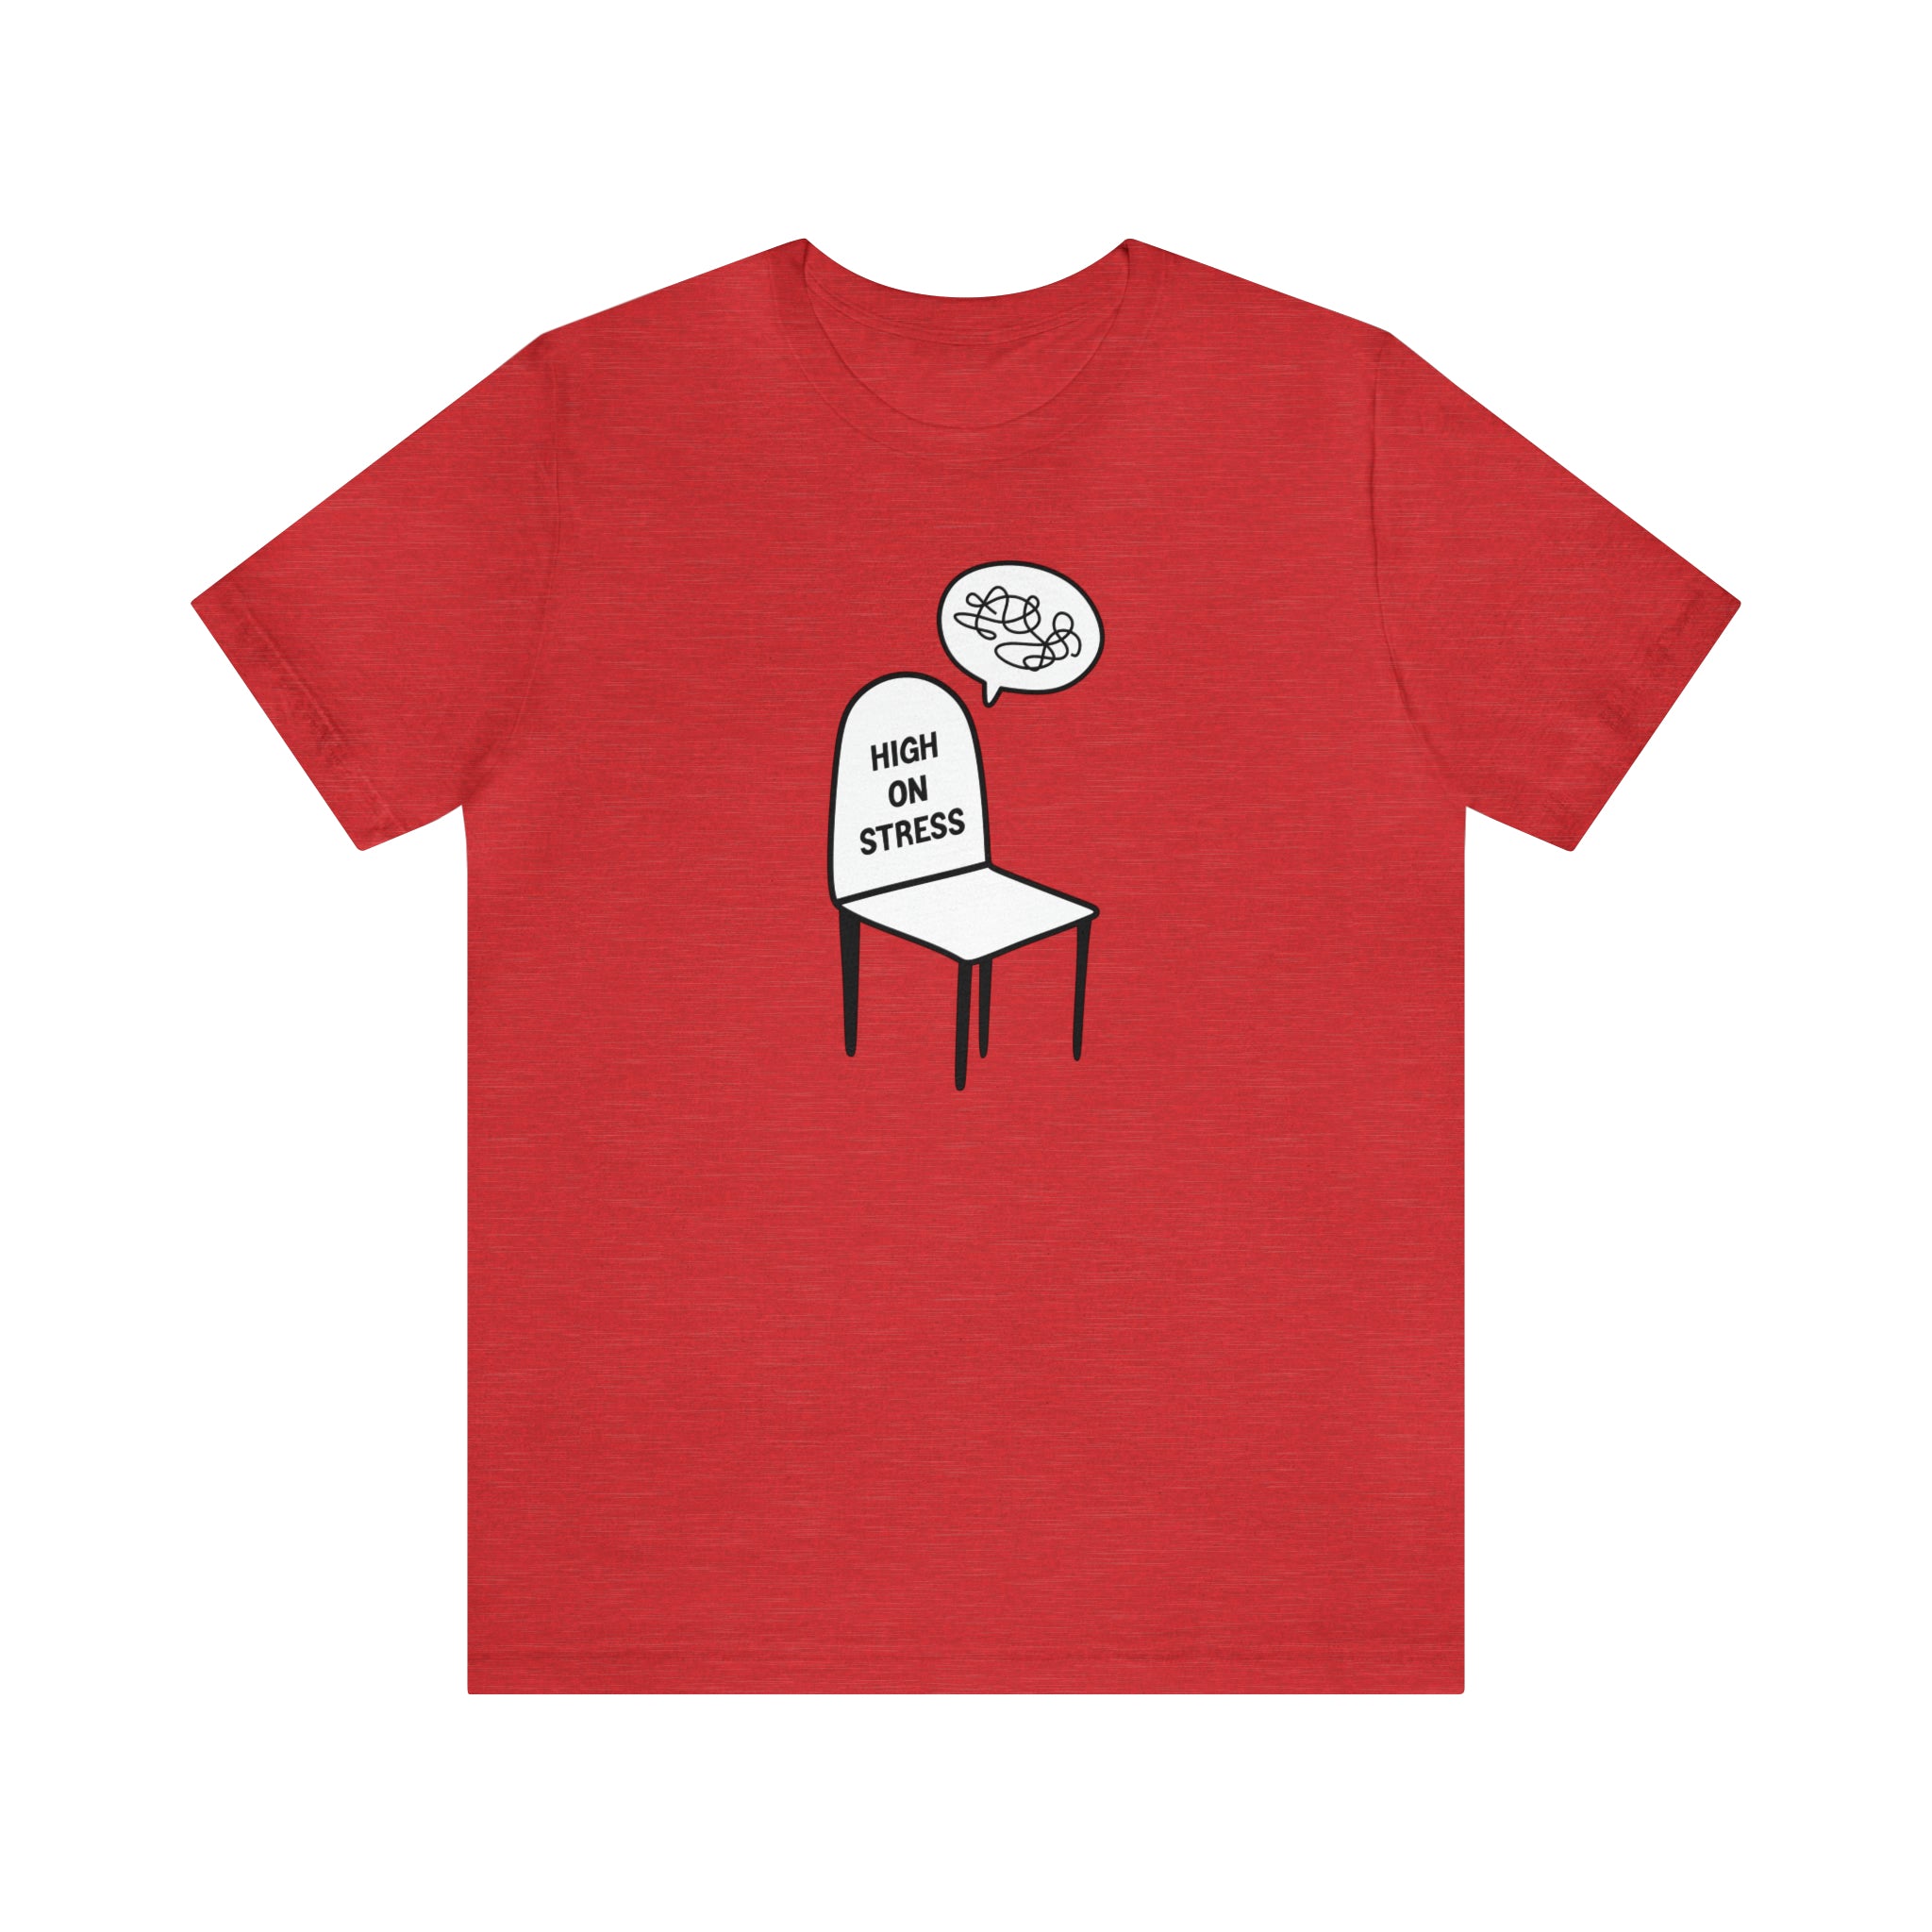 A High on Stress t-shirt with a classic image of a chair and a speech bubble.